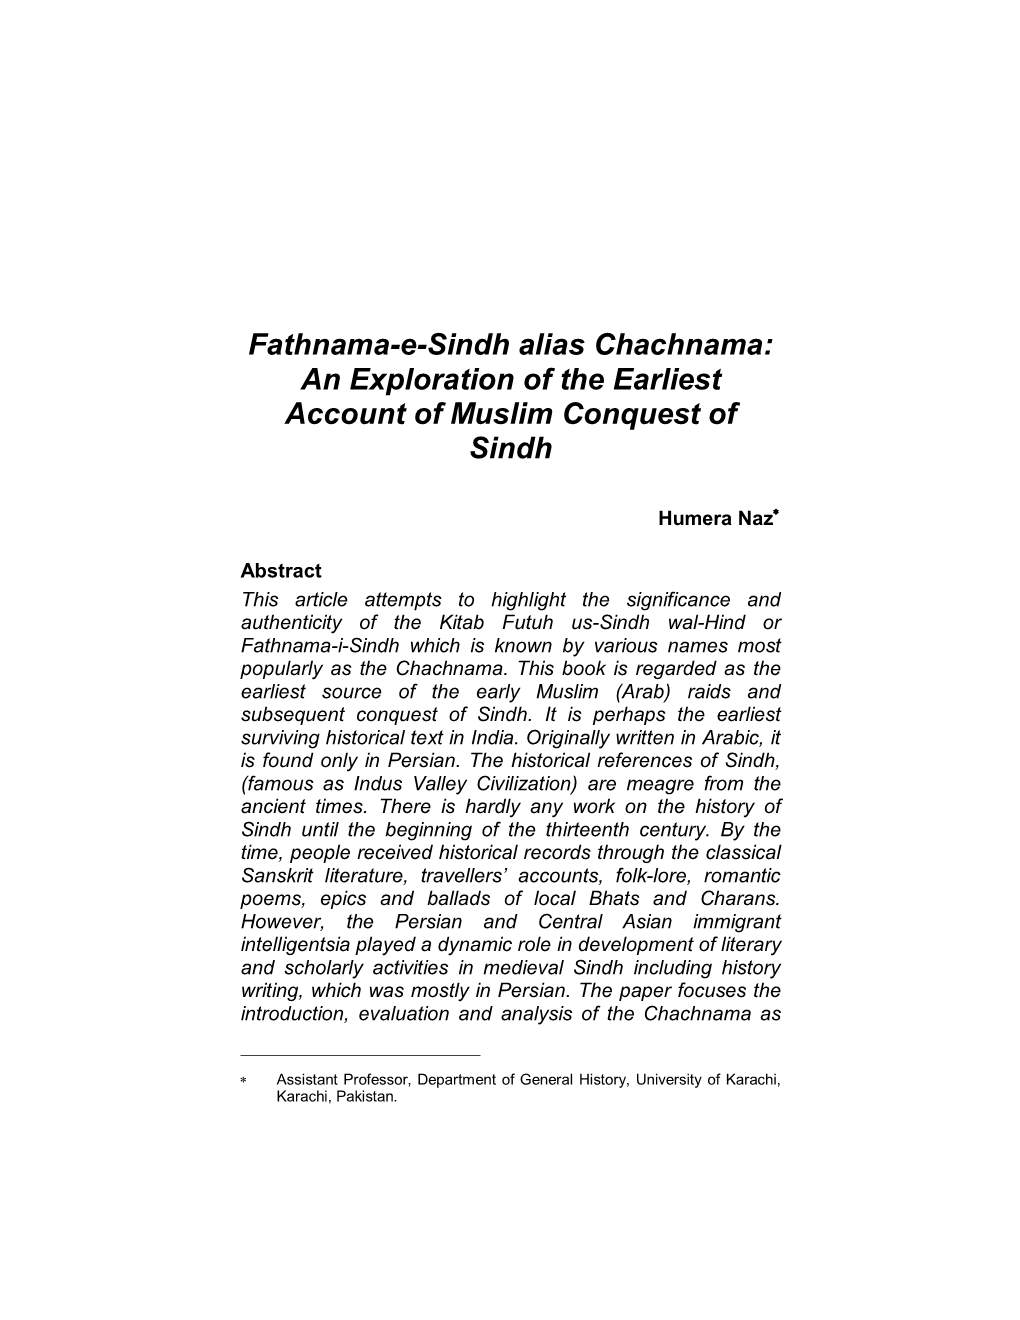 Fathnama-E-Sindh Alias Chachnama: an Exploration of the Earliest Account of Muslim Conquest of Sindh